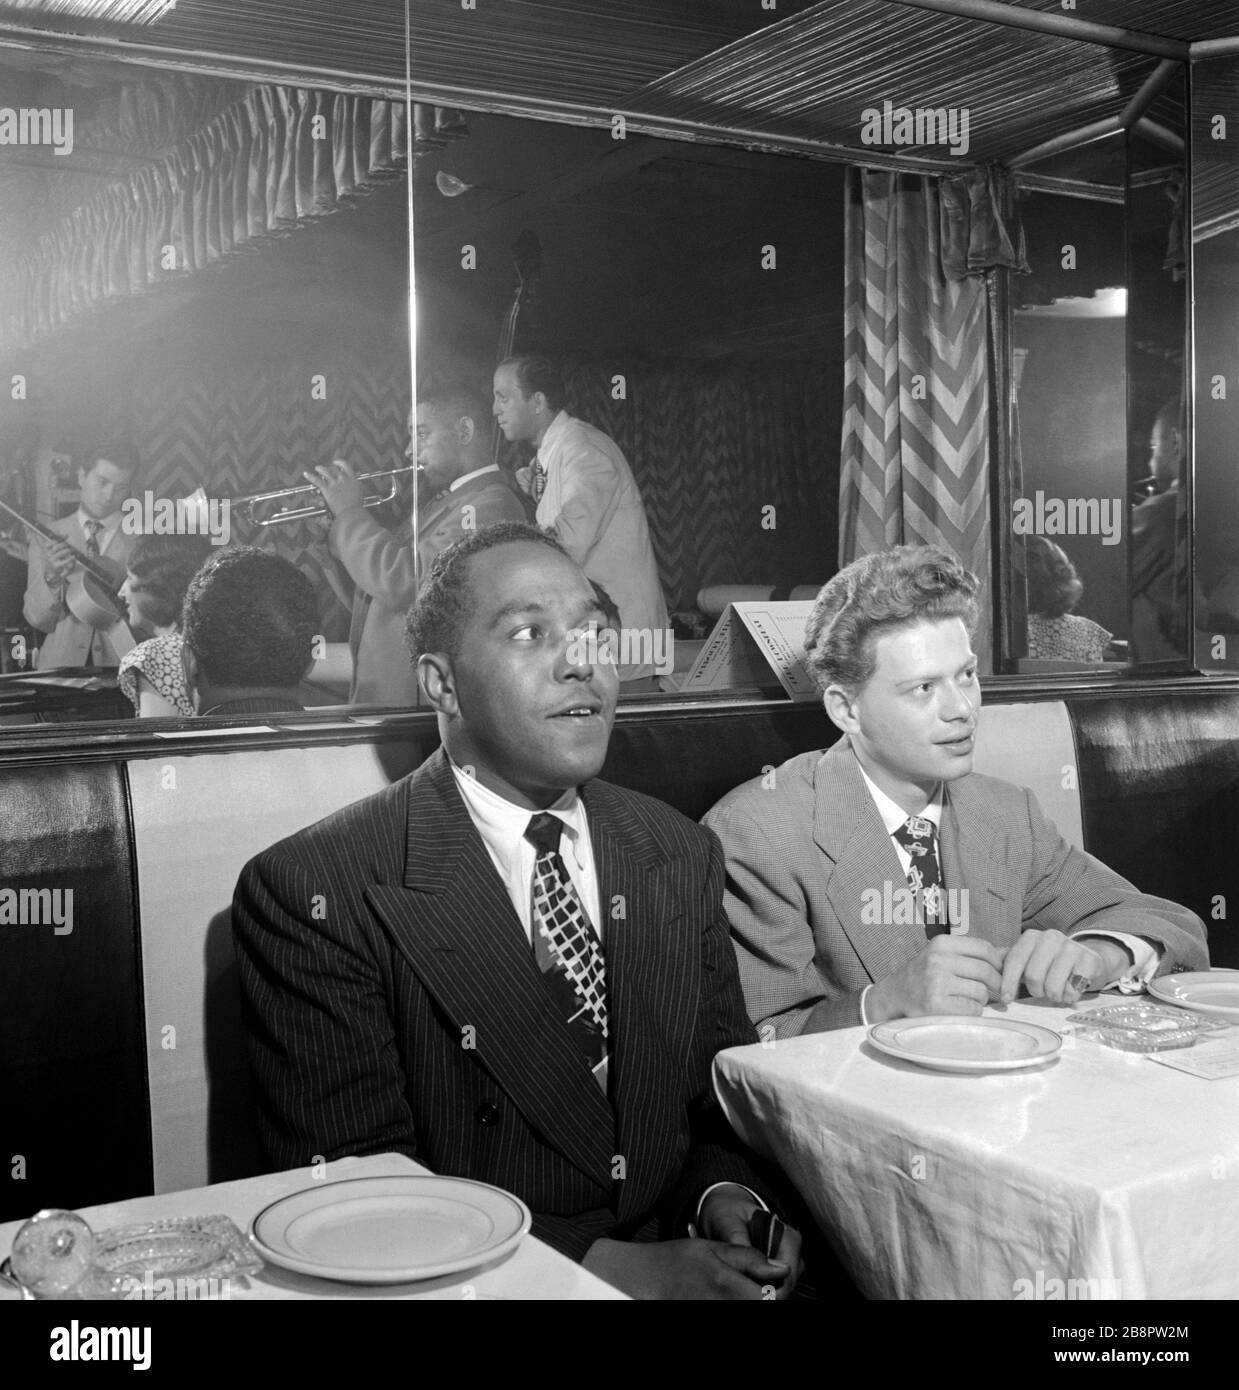 NEW YORK, NY - 1947: American jazz saxophonist and composer Charlie Parker (1920-1955), and American jazz trumpeter Red Rodney (1927-1994) look on as American jazz guitarists Chuck Wayne (1923-1997), American jazz trumpeter, bandleader, composer and singer Dizzy Gillespie (1917-1993) and American jazz vibraphonist, pianist, and arranger Margie Hyams (1920-2012) play on stage circa 1947 at the Downbeat Club in New York, New York. Credit:William Gottlieb / Rock Negatives/ MediaPunch Stock Photo